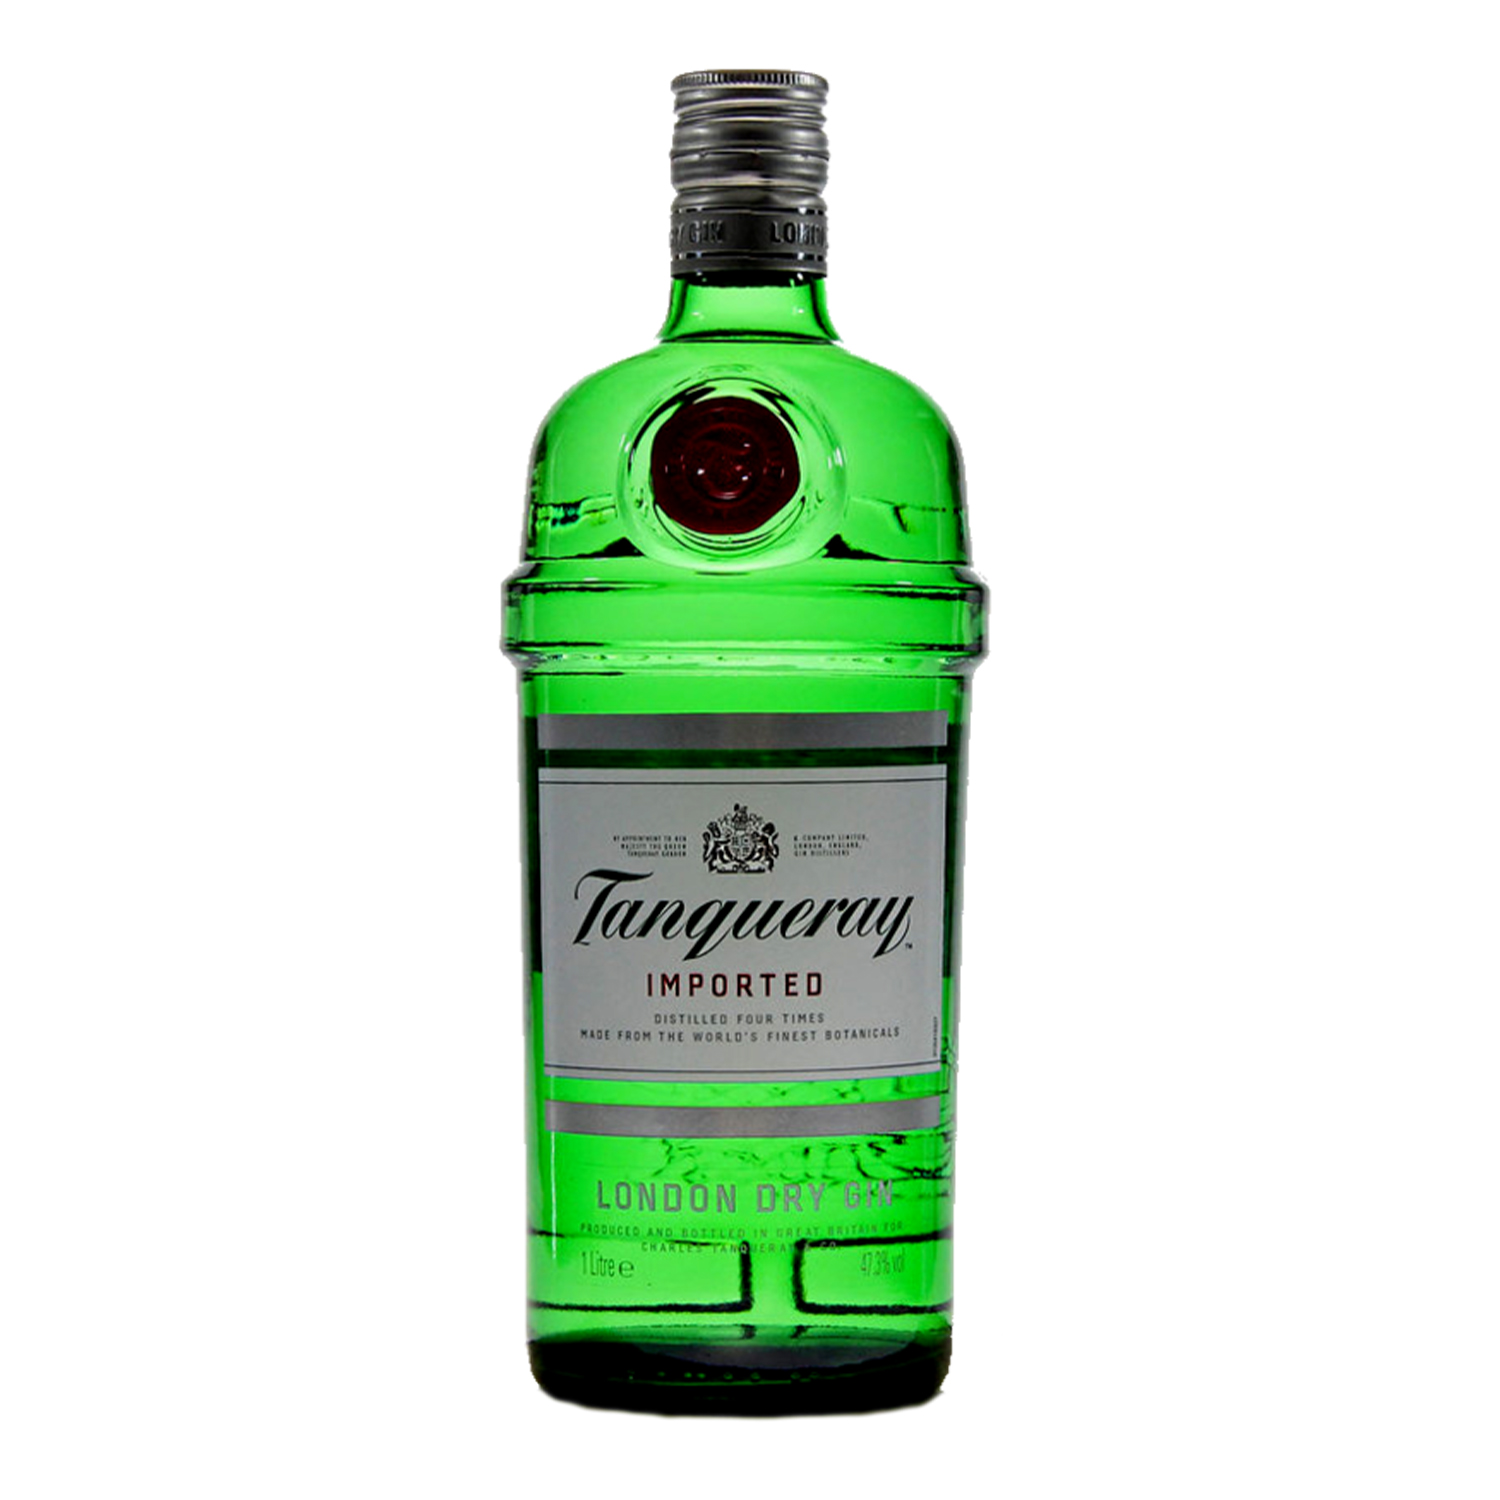 Tanqueray London dry gin 47,3% 1L